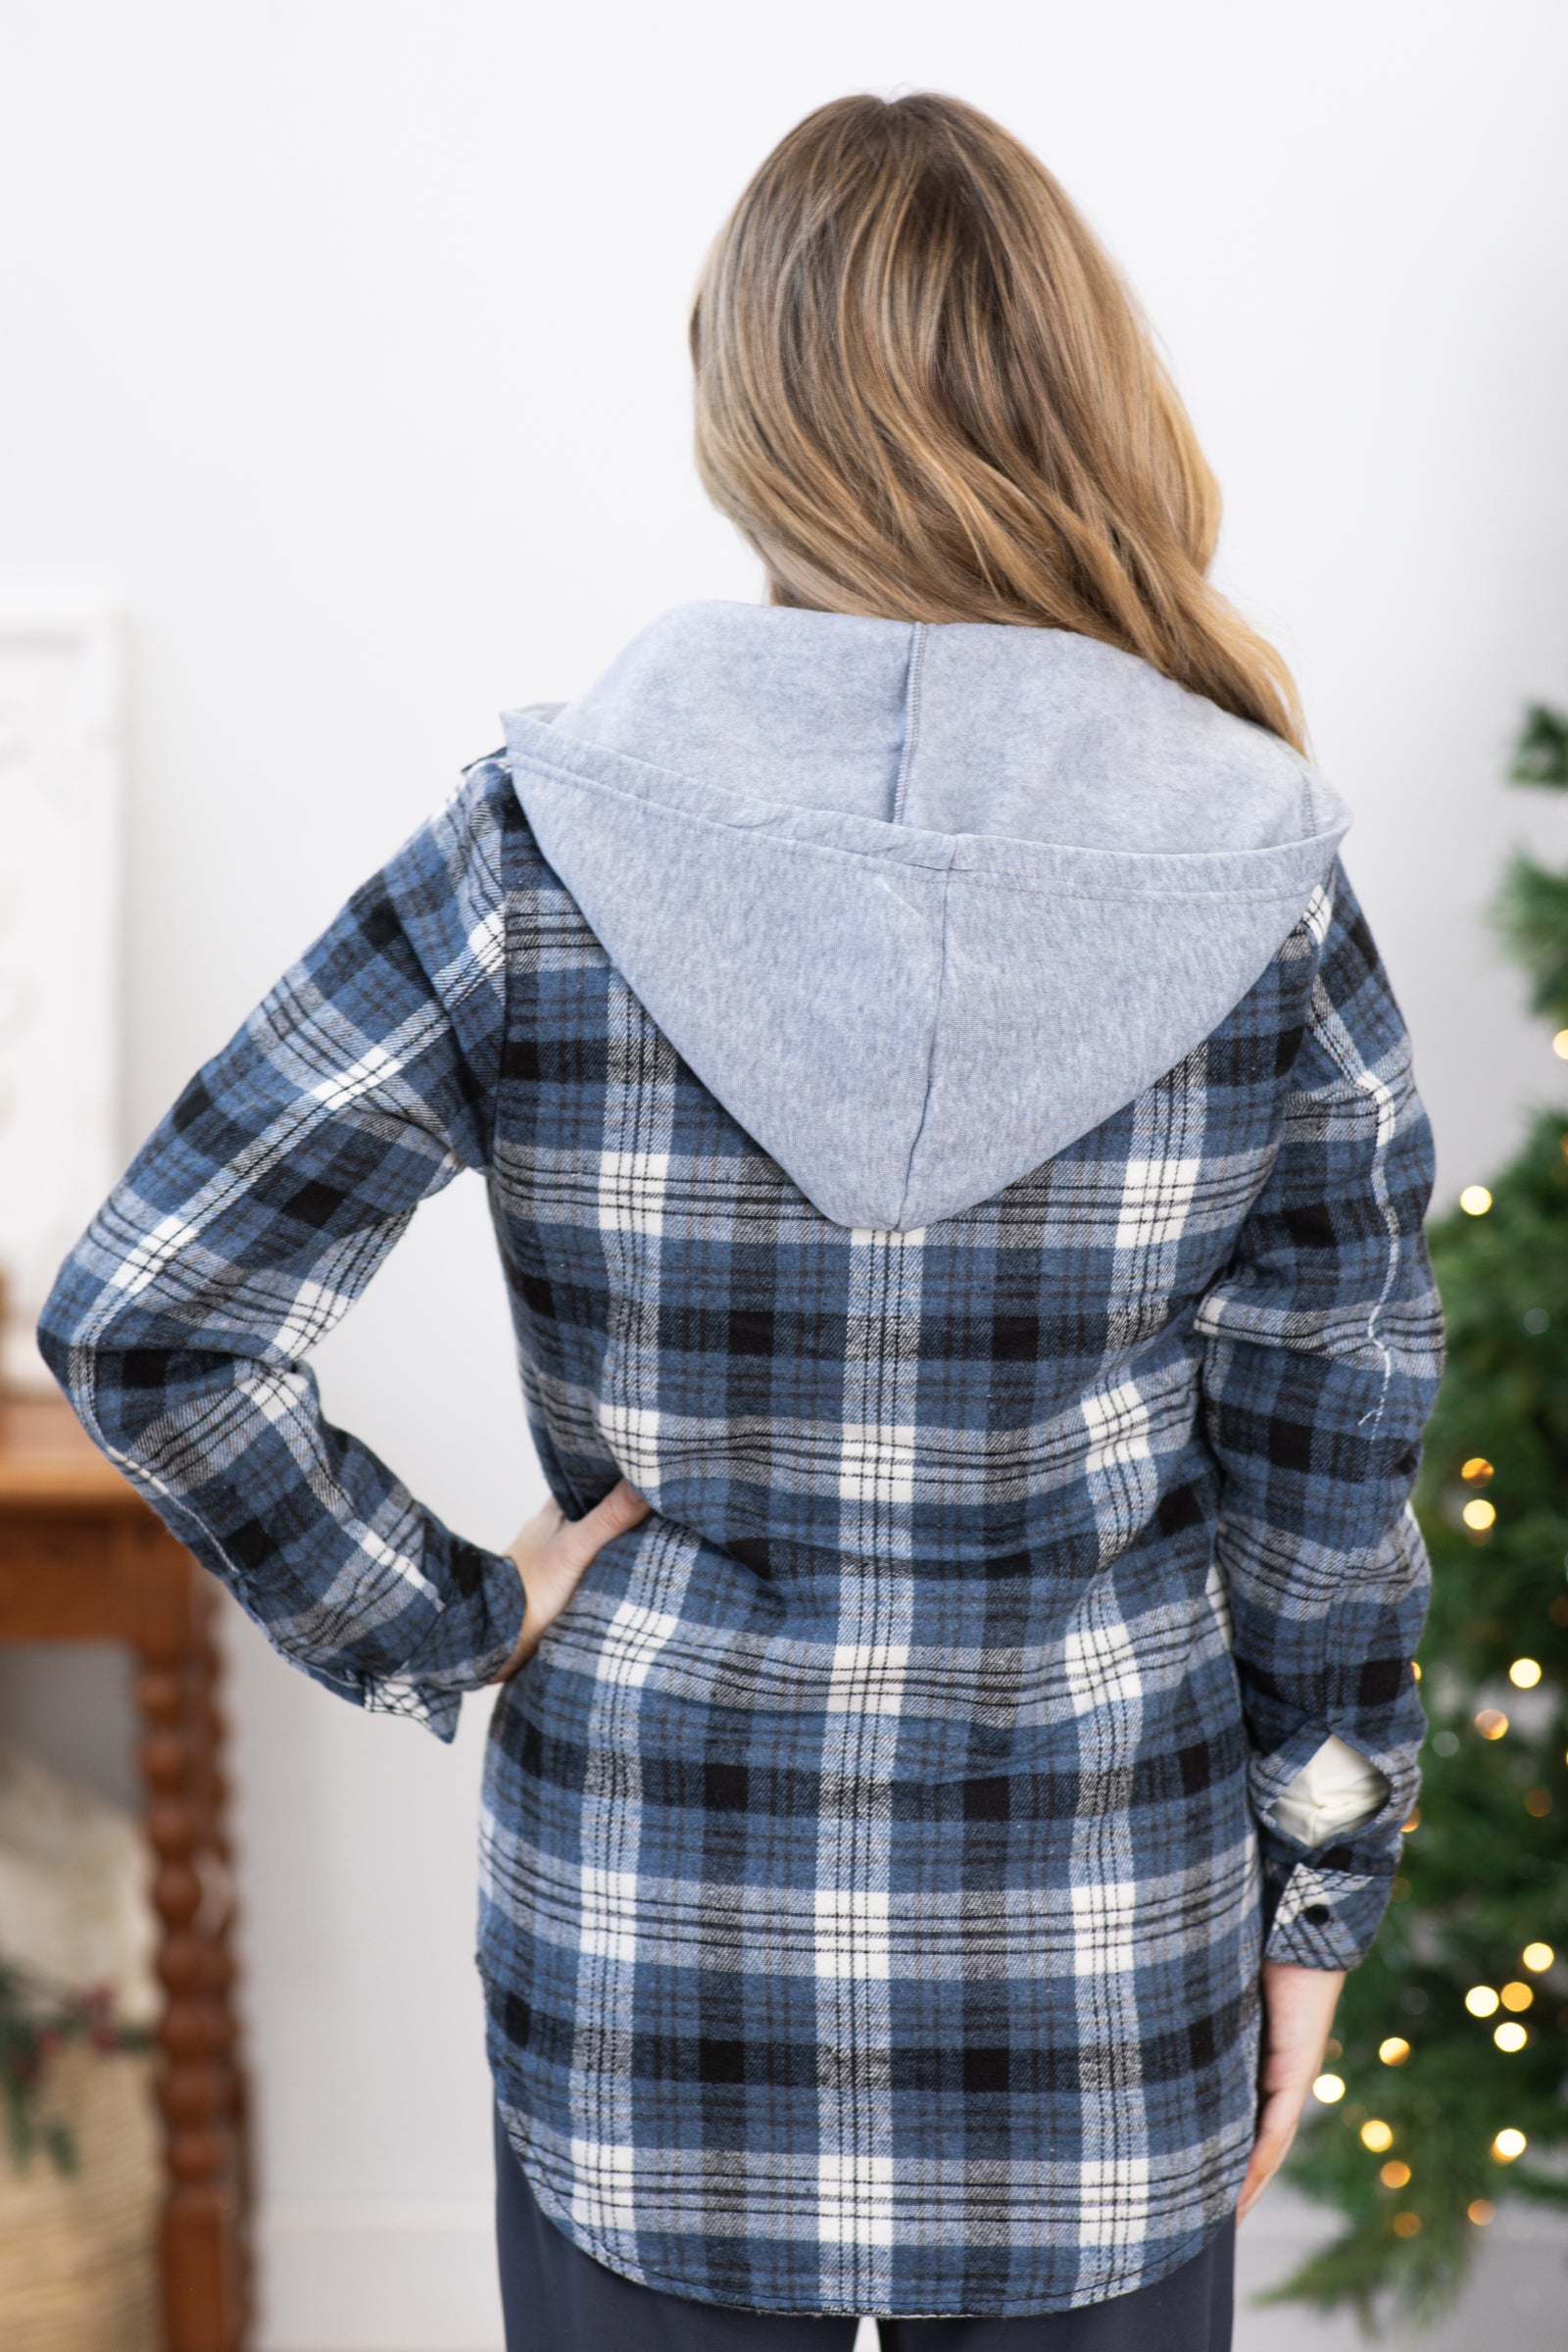 Dusty Blue and Black Plaid Jacket With Hood